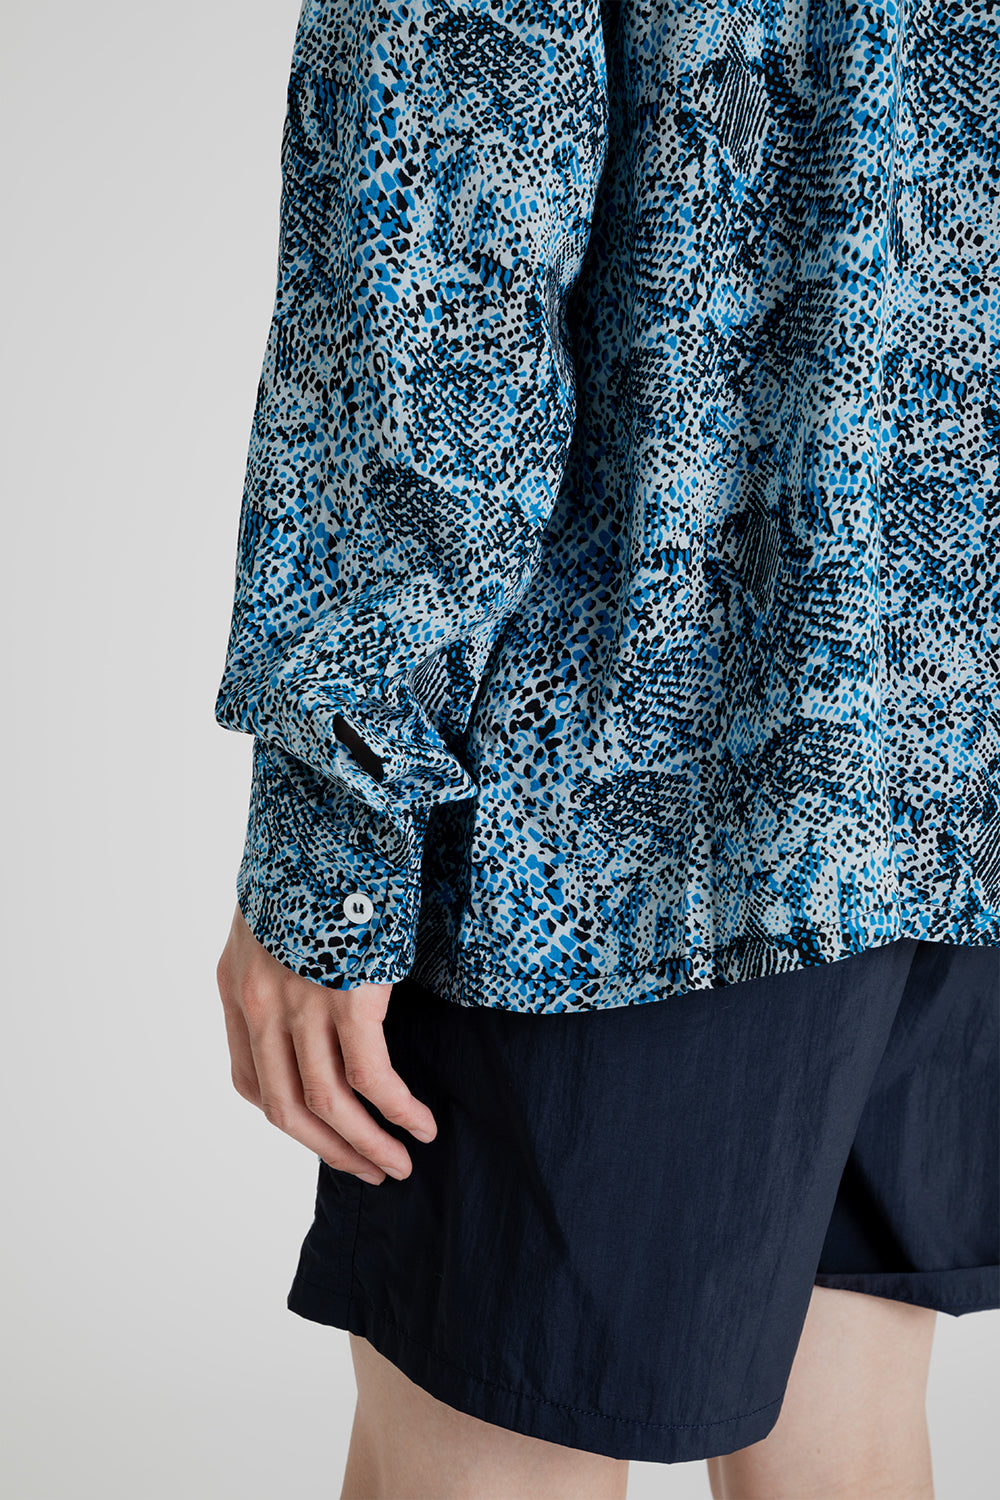 Brother Brother Products LS Rayon Shirt in Blue Snakeskin